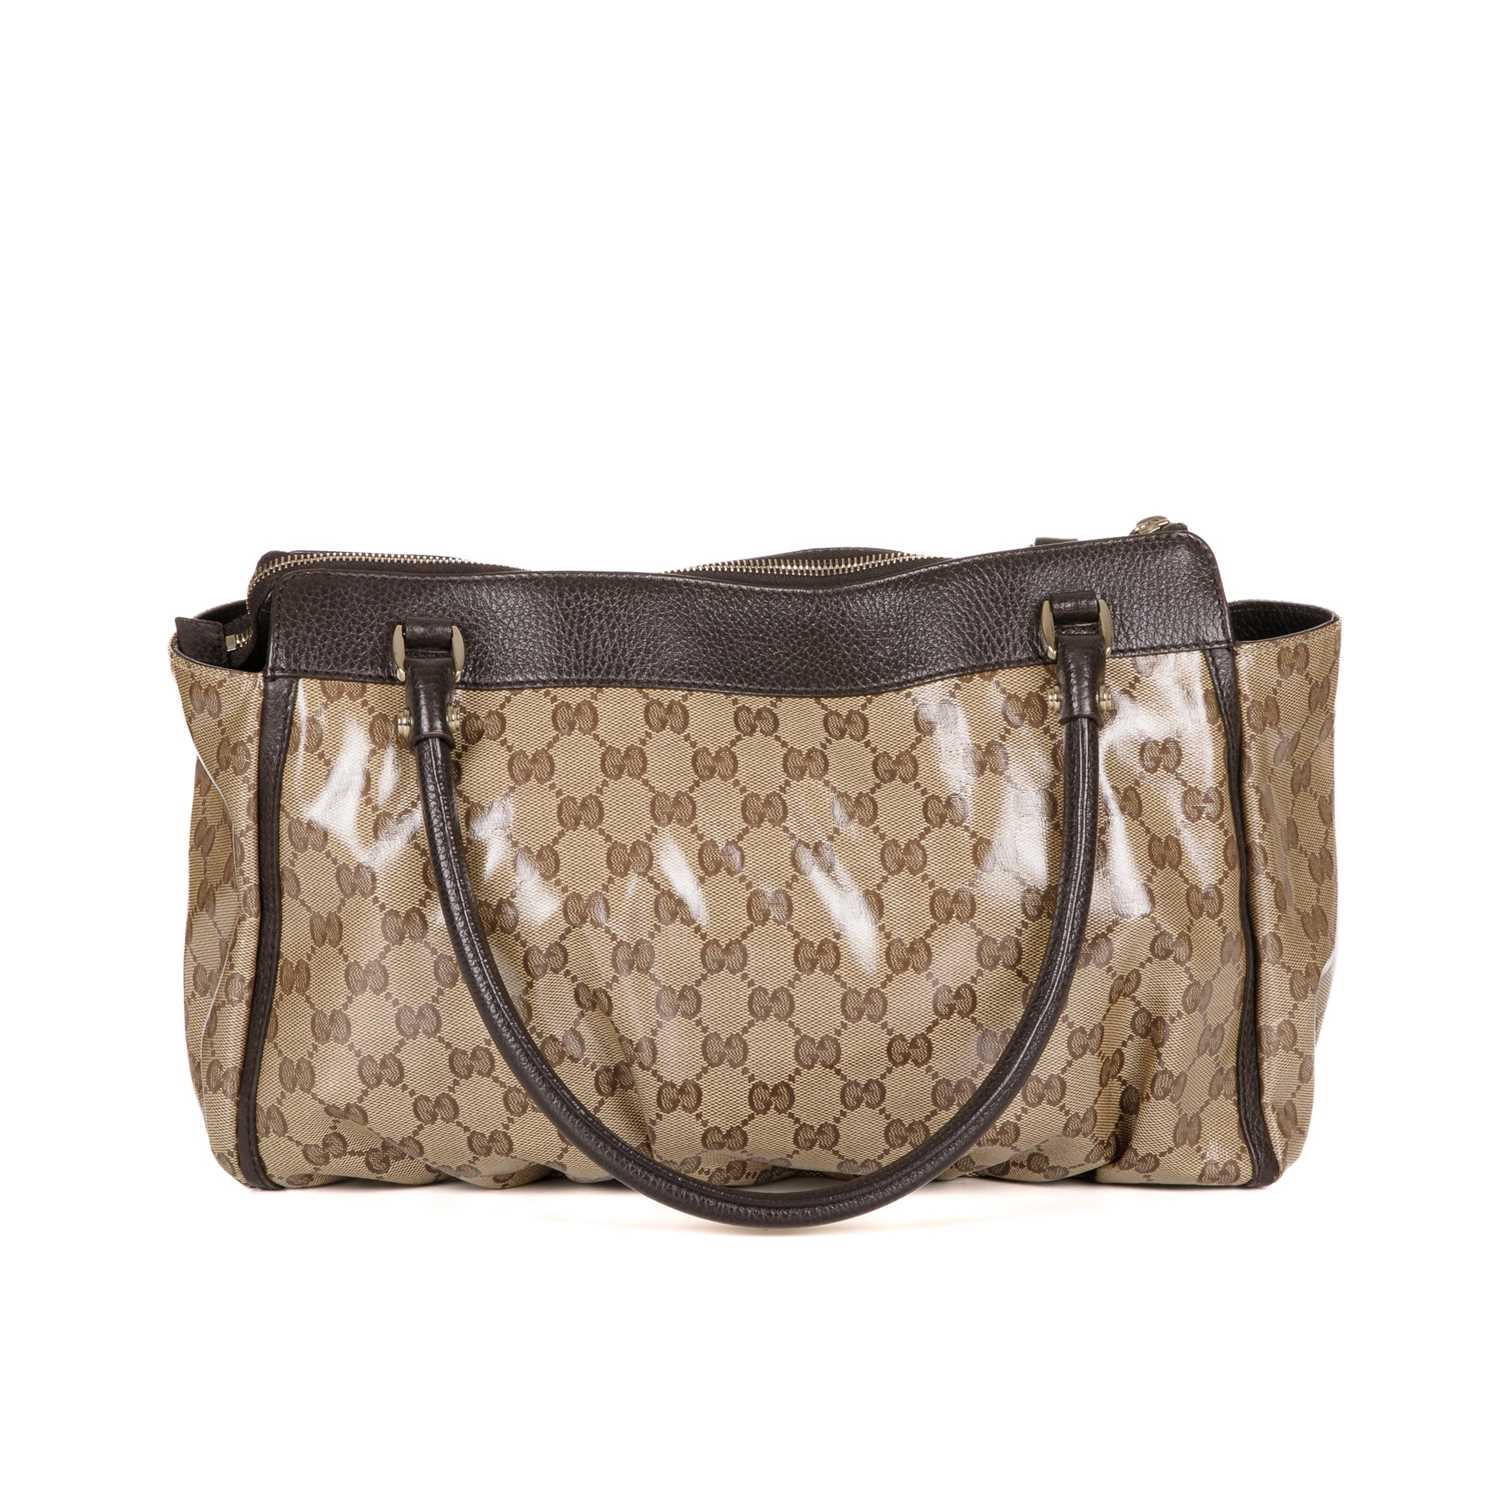 Gucci, a GG Crystal Abbey tote, designed with maker's PVC coated monogram exterior and brown leather - Image 2 of 4